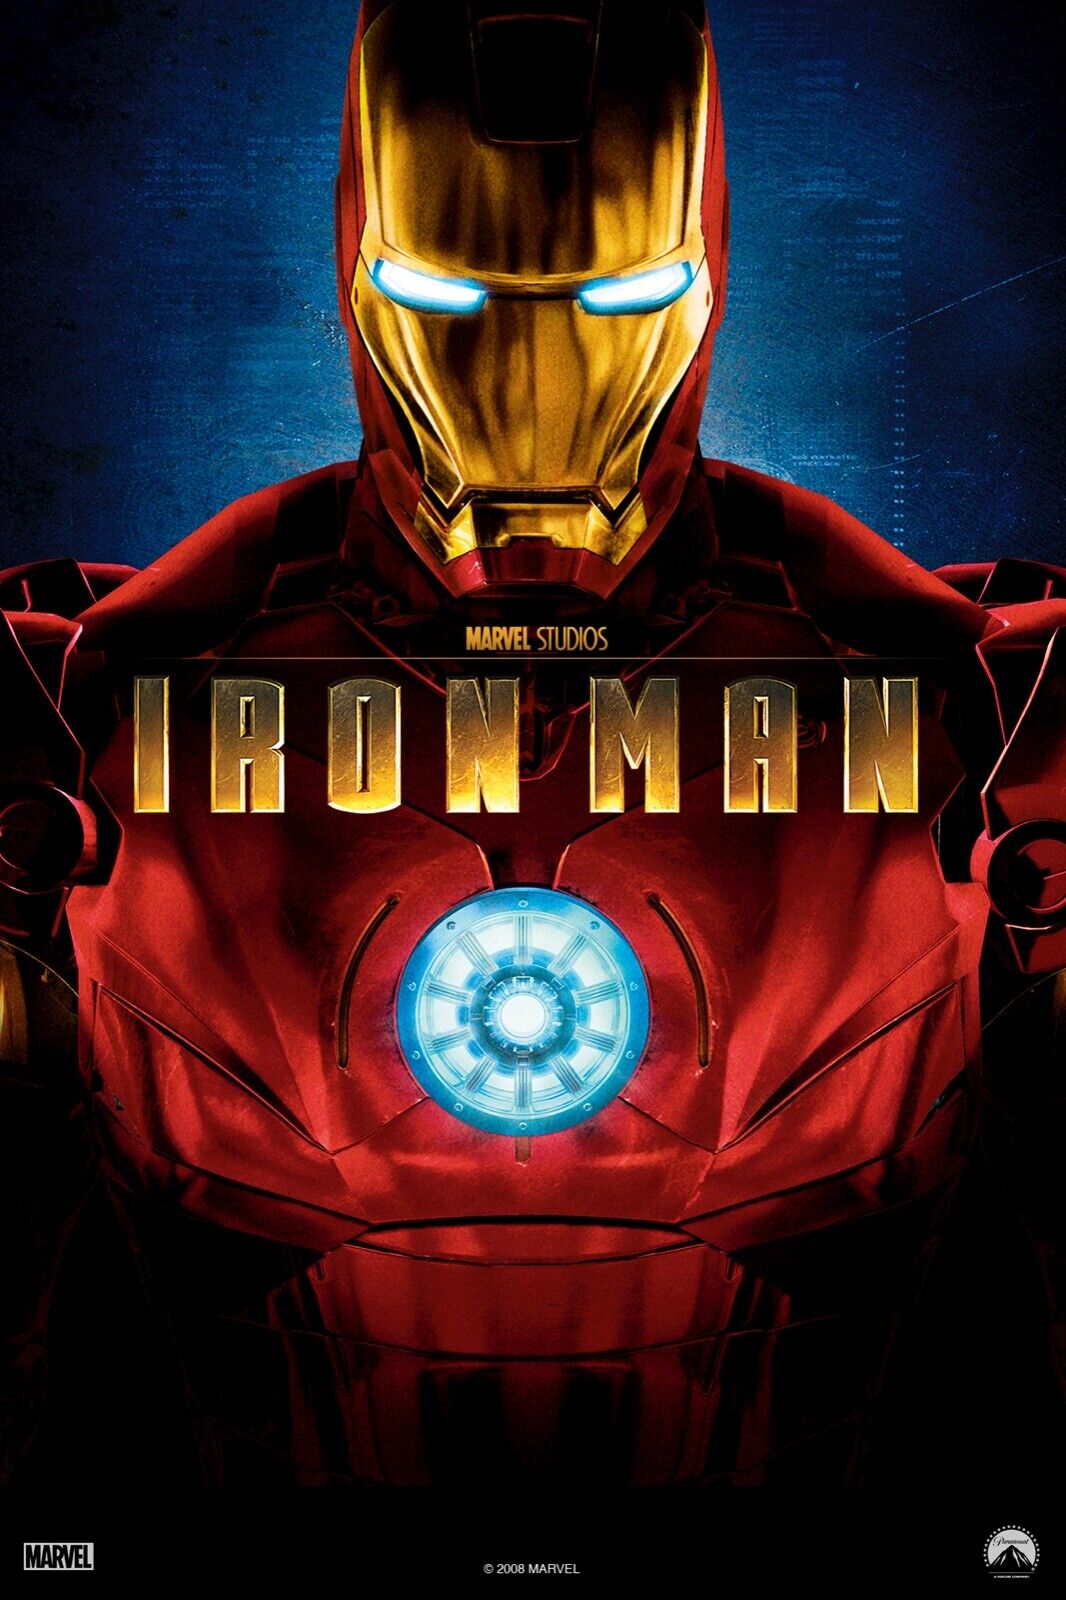 IRON MAN Movie Poster RePrint Wall decal art Marvel first movie, avengers   655